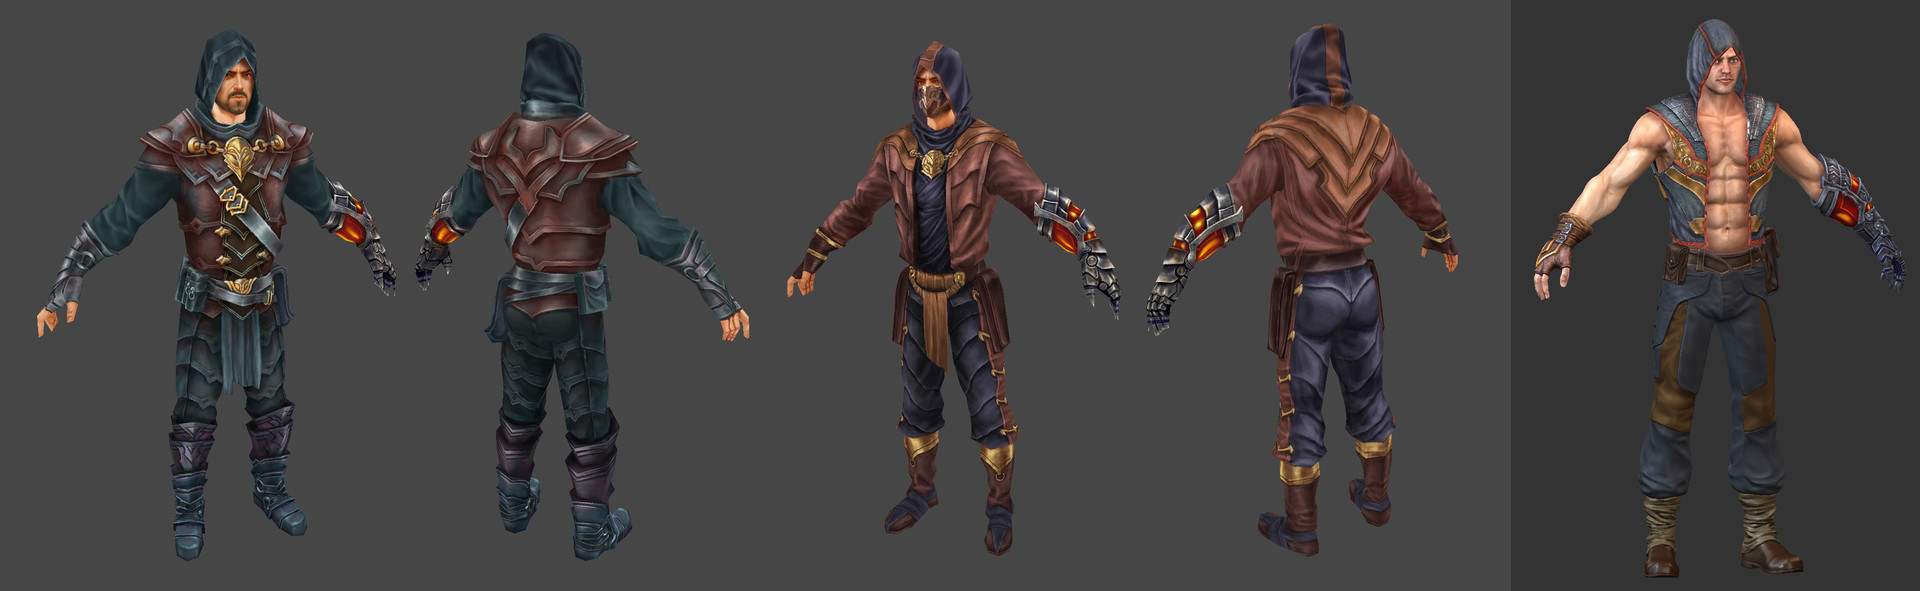 ArtStation - Characters from Running Shadow mobile game